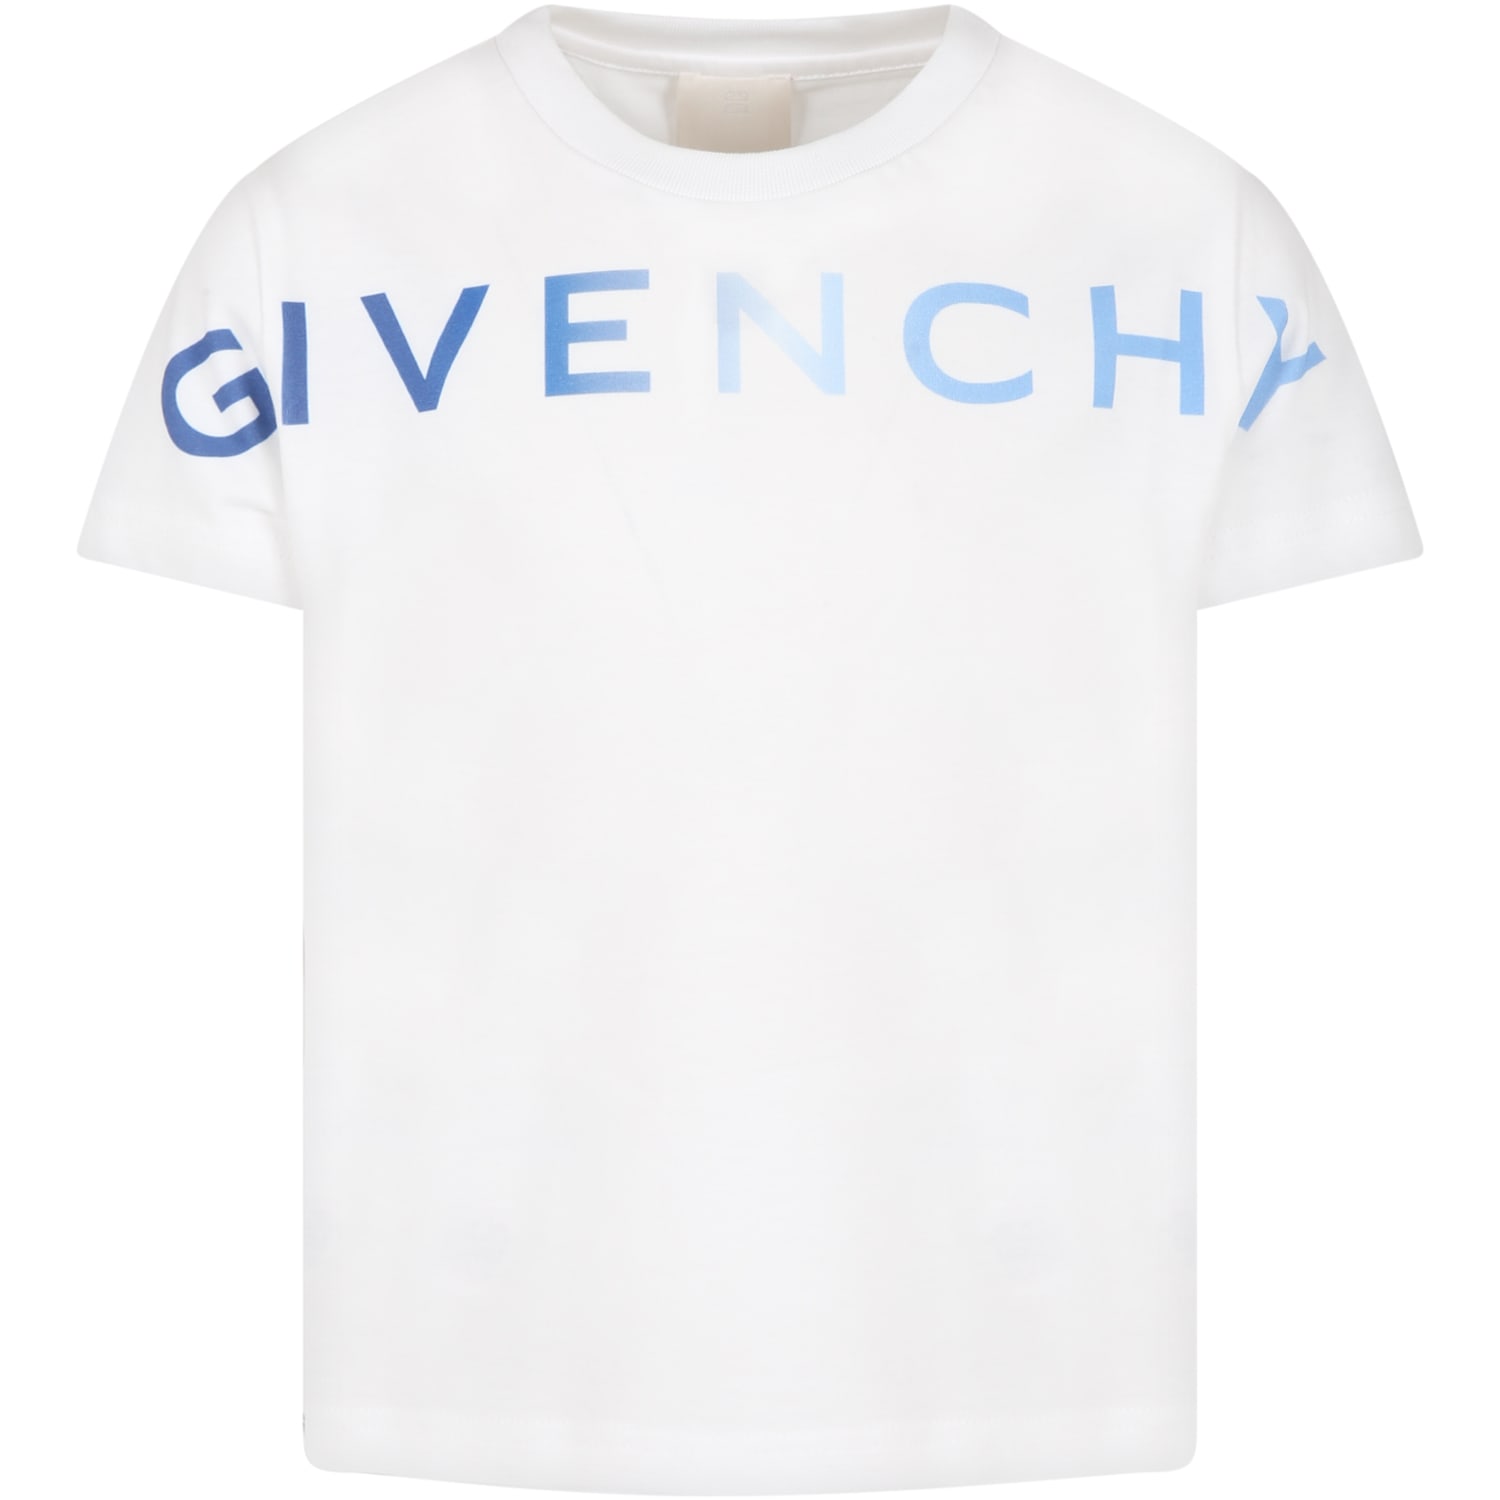 Givenchy White T-shirt For Boy With Blue Logo